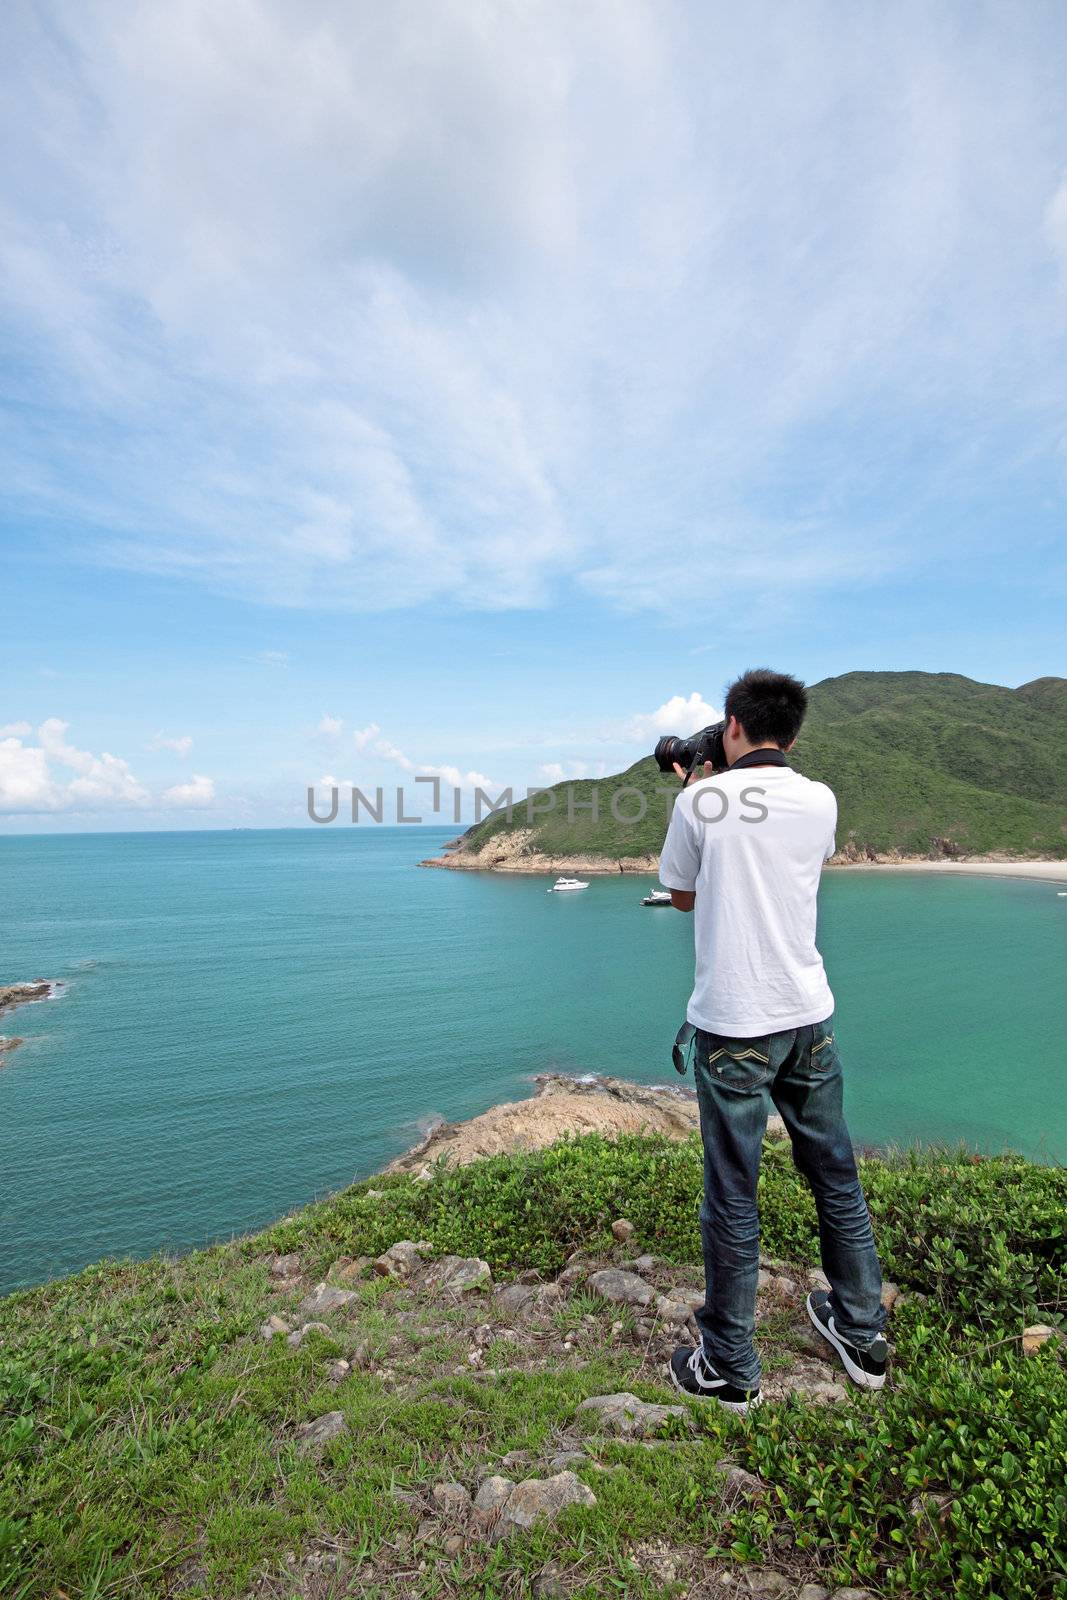 photographer takes a photo of the landscape 